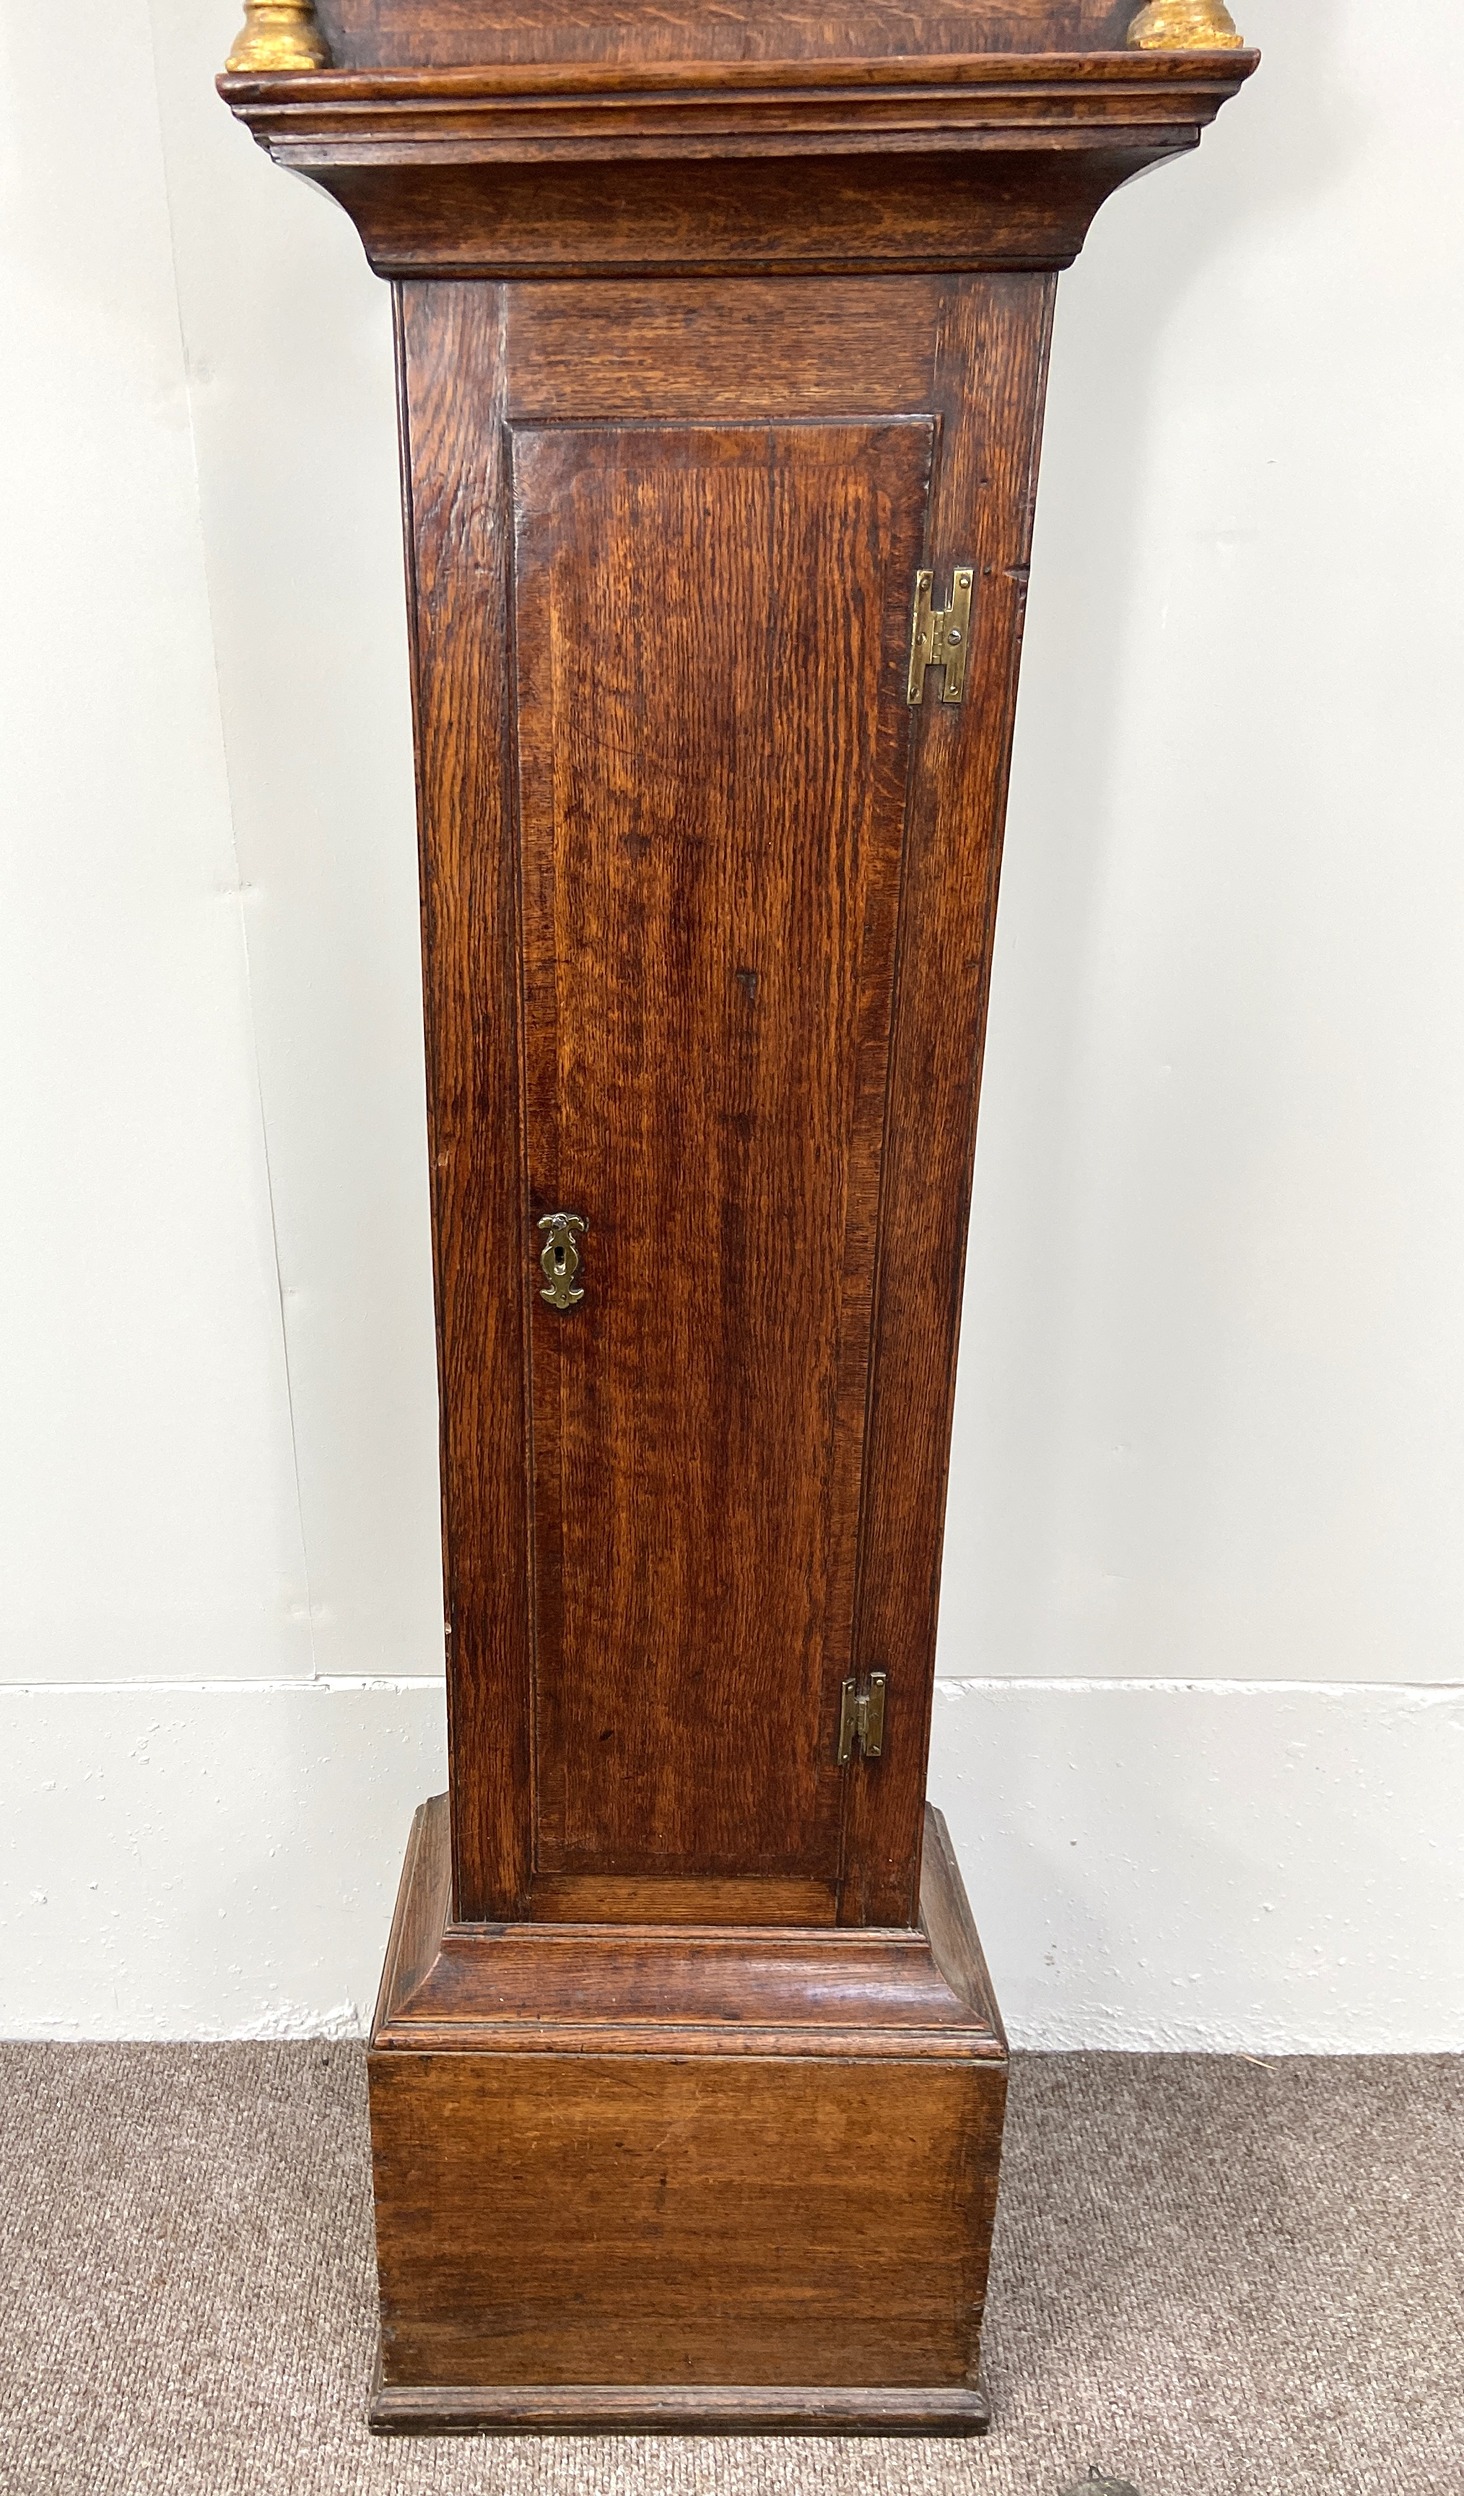 An early 18th century oak longcase clock, by Joseph Taylor, in an architectural provincial caddy - Image 3 of 8